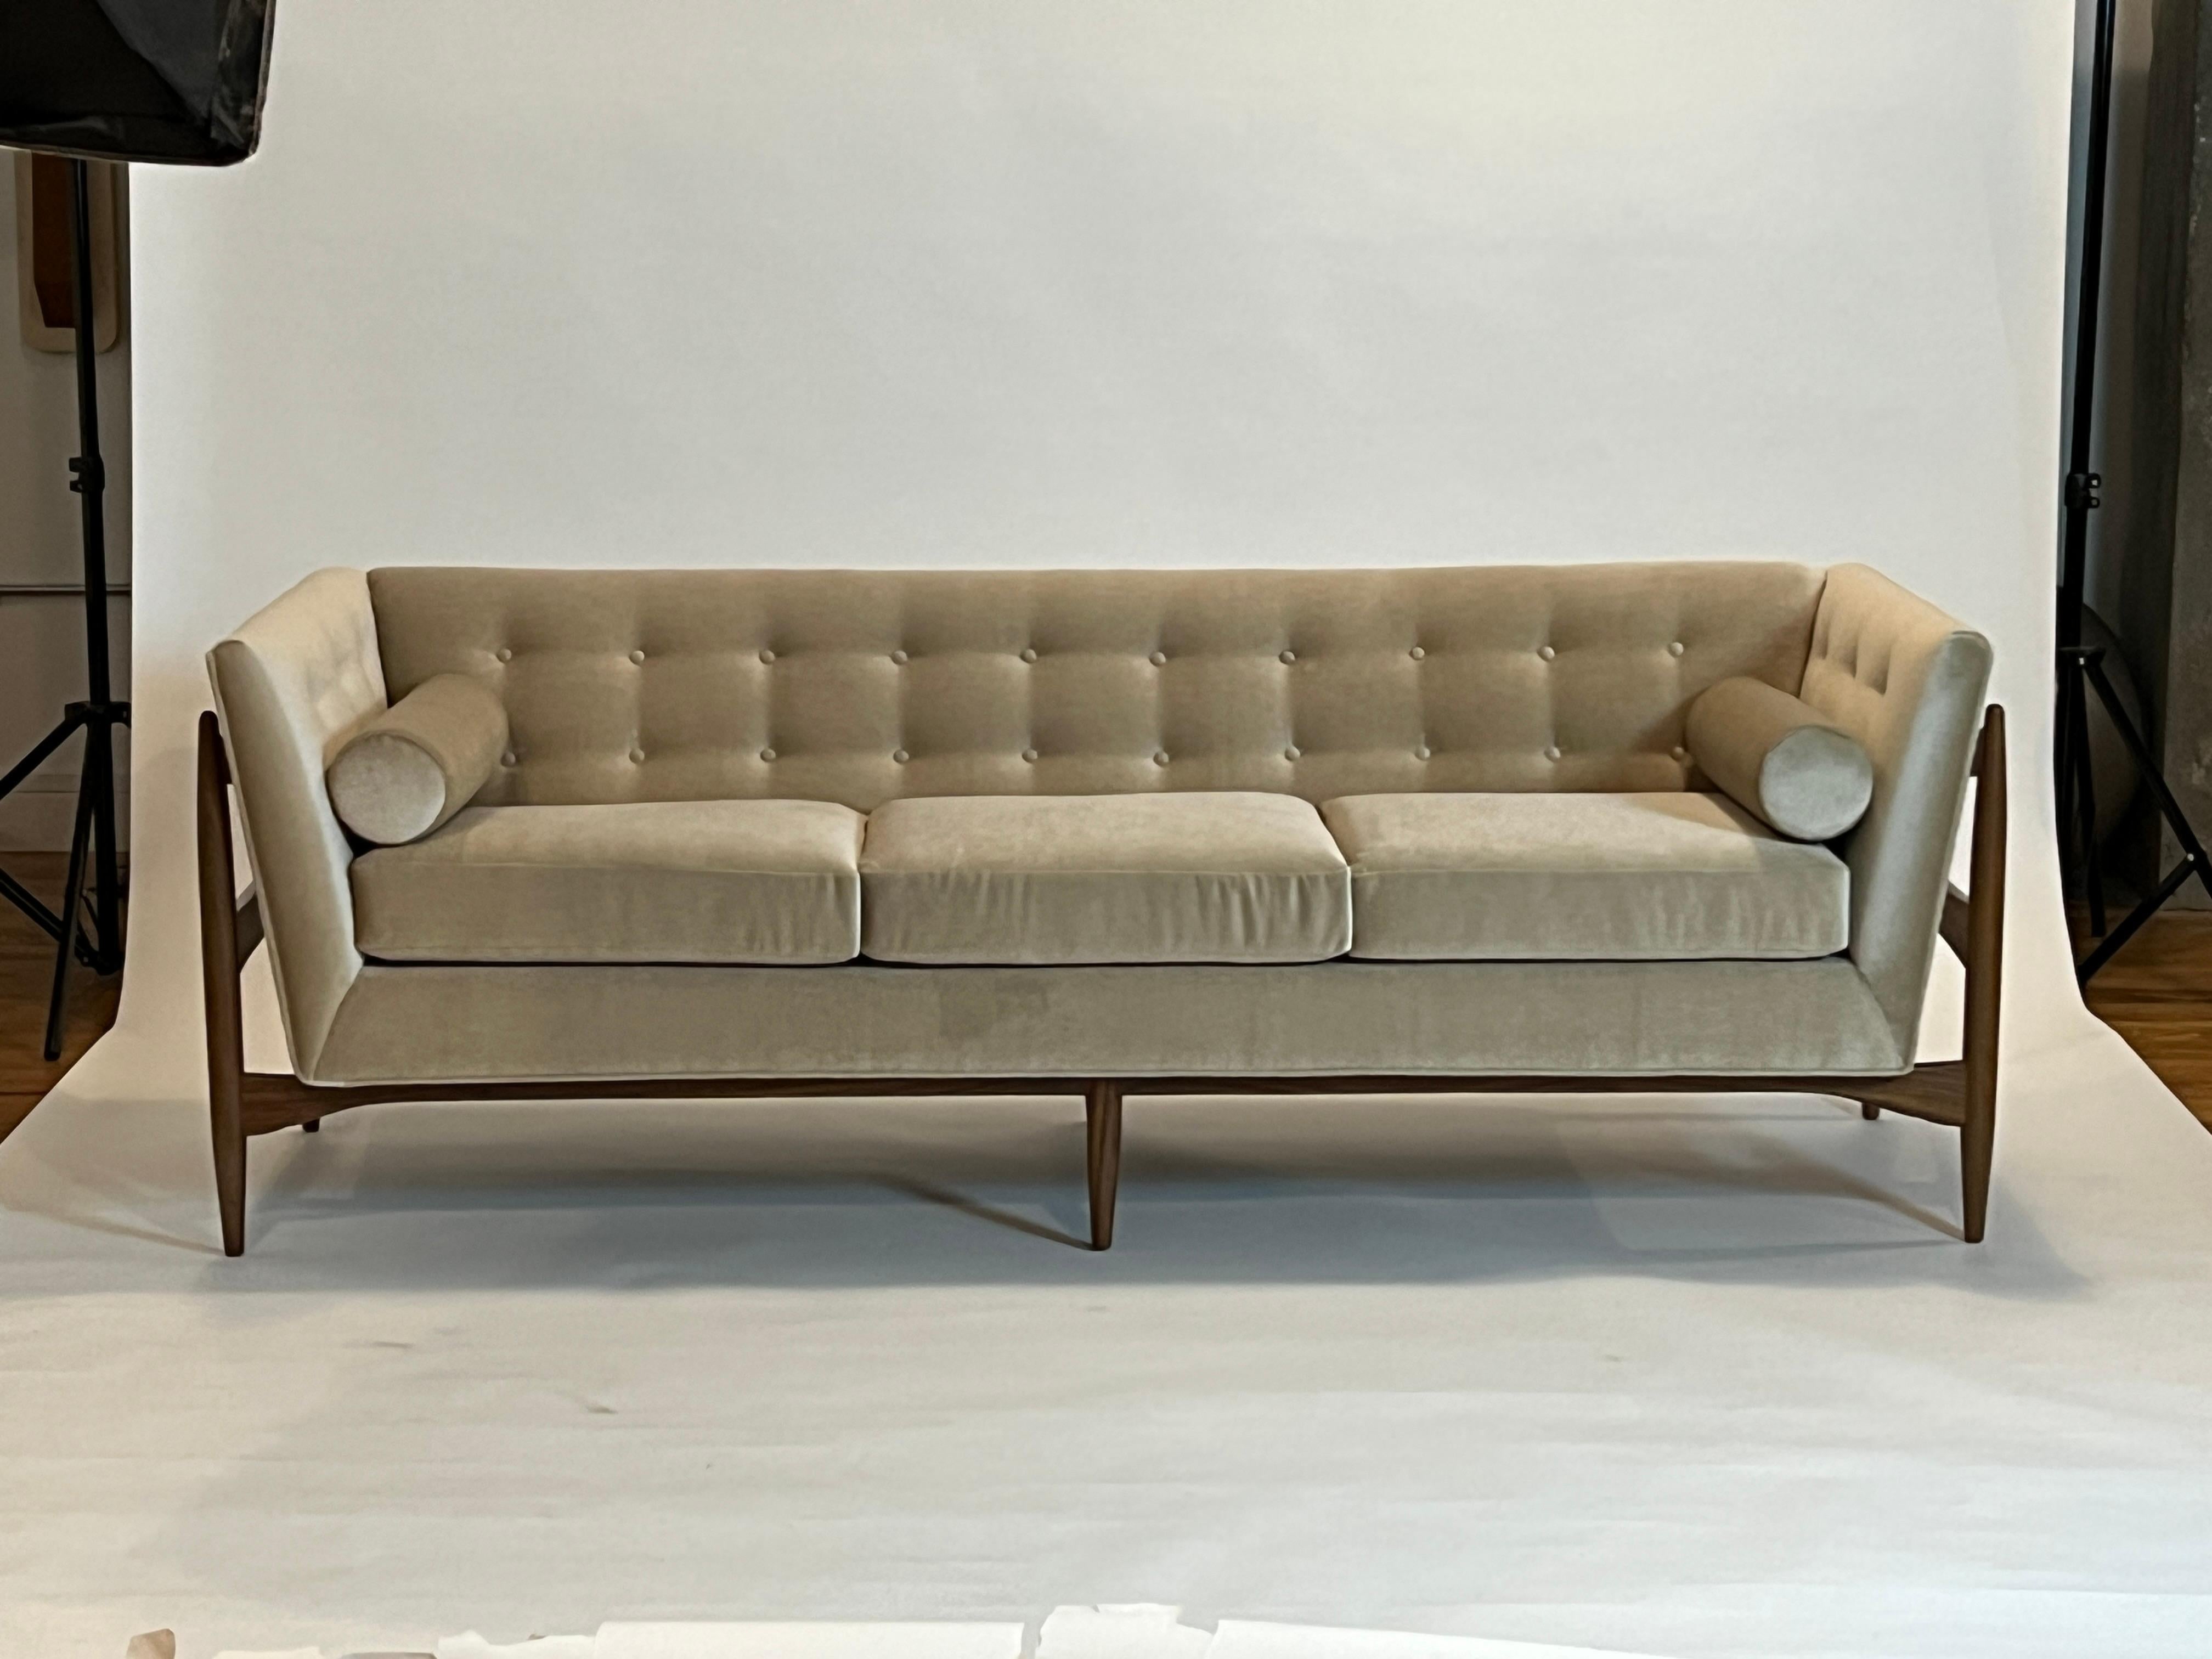 Made by Thayer Coggin and designed by Milo Baughman in 1959, the Button Up sofa is a timeless midcentury modern sofa. The Button Up sofa features button tufting and a solid walnut wood base with striking good looks from every angle. 

This vintage